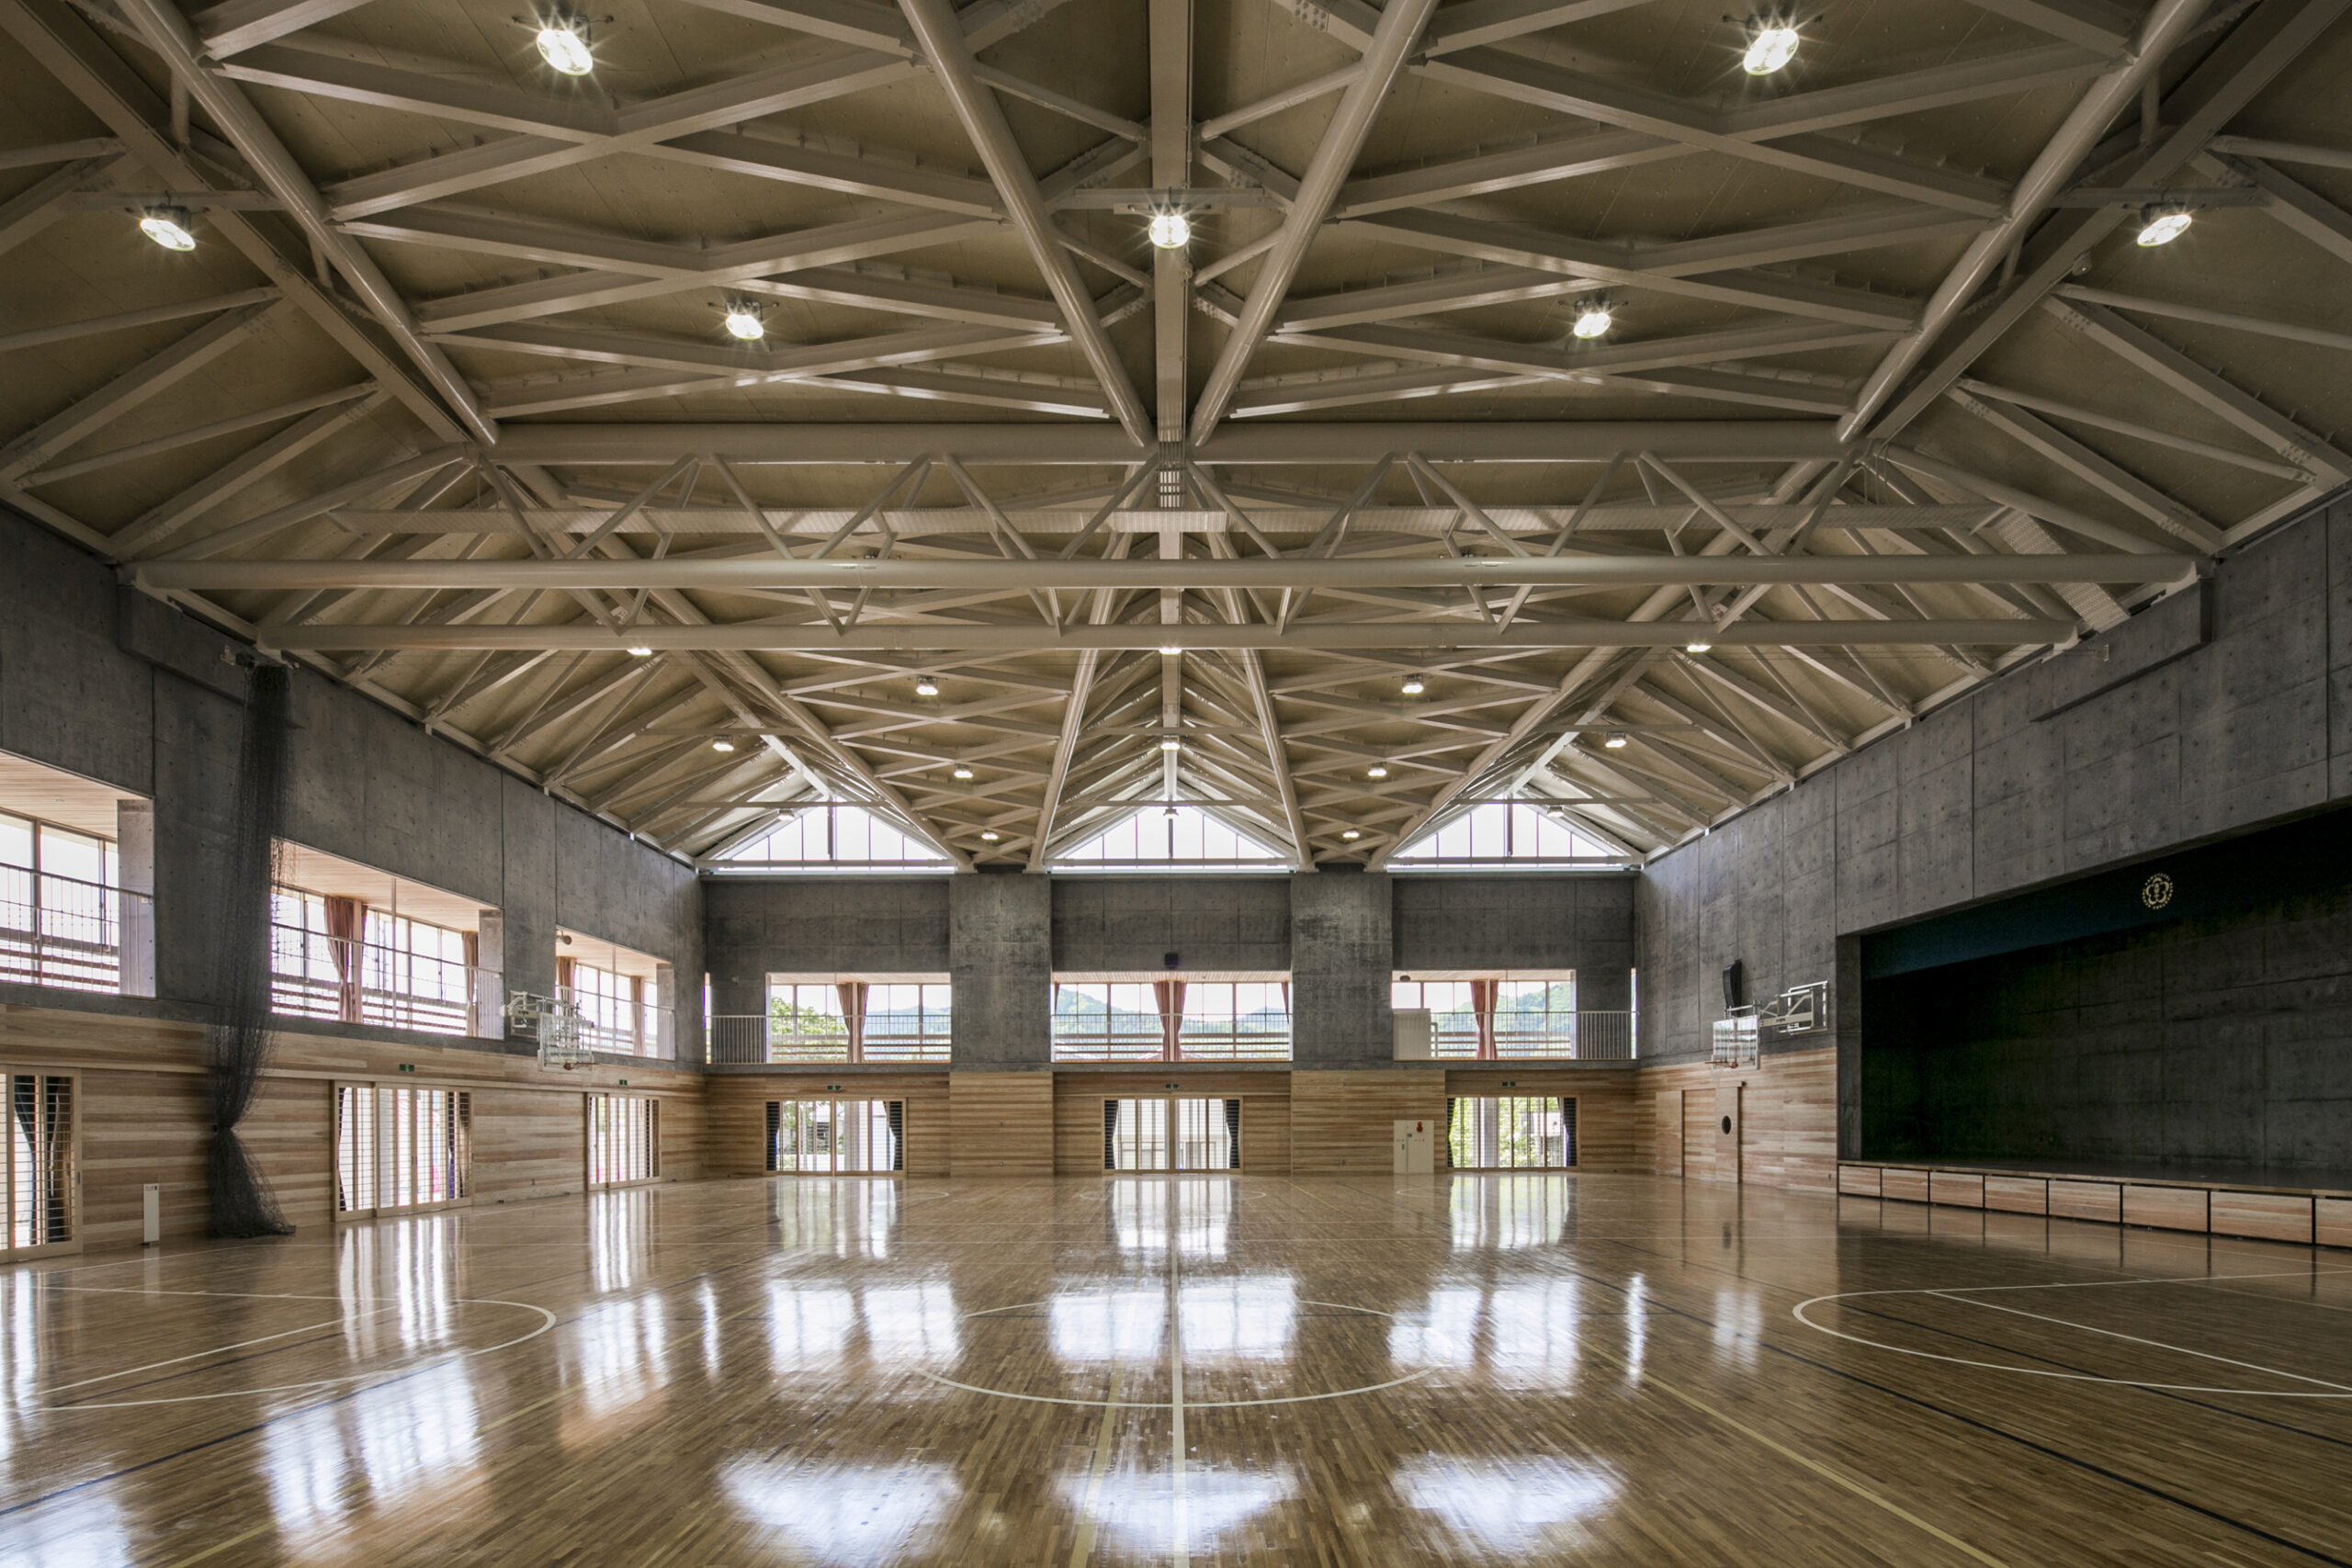 A stunning view of the gym, featuring a perfect blend of concrete and wood, with a beautiful wooden brass roof structure.